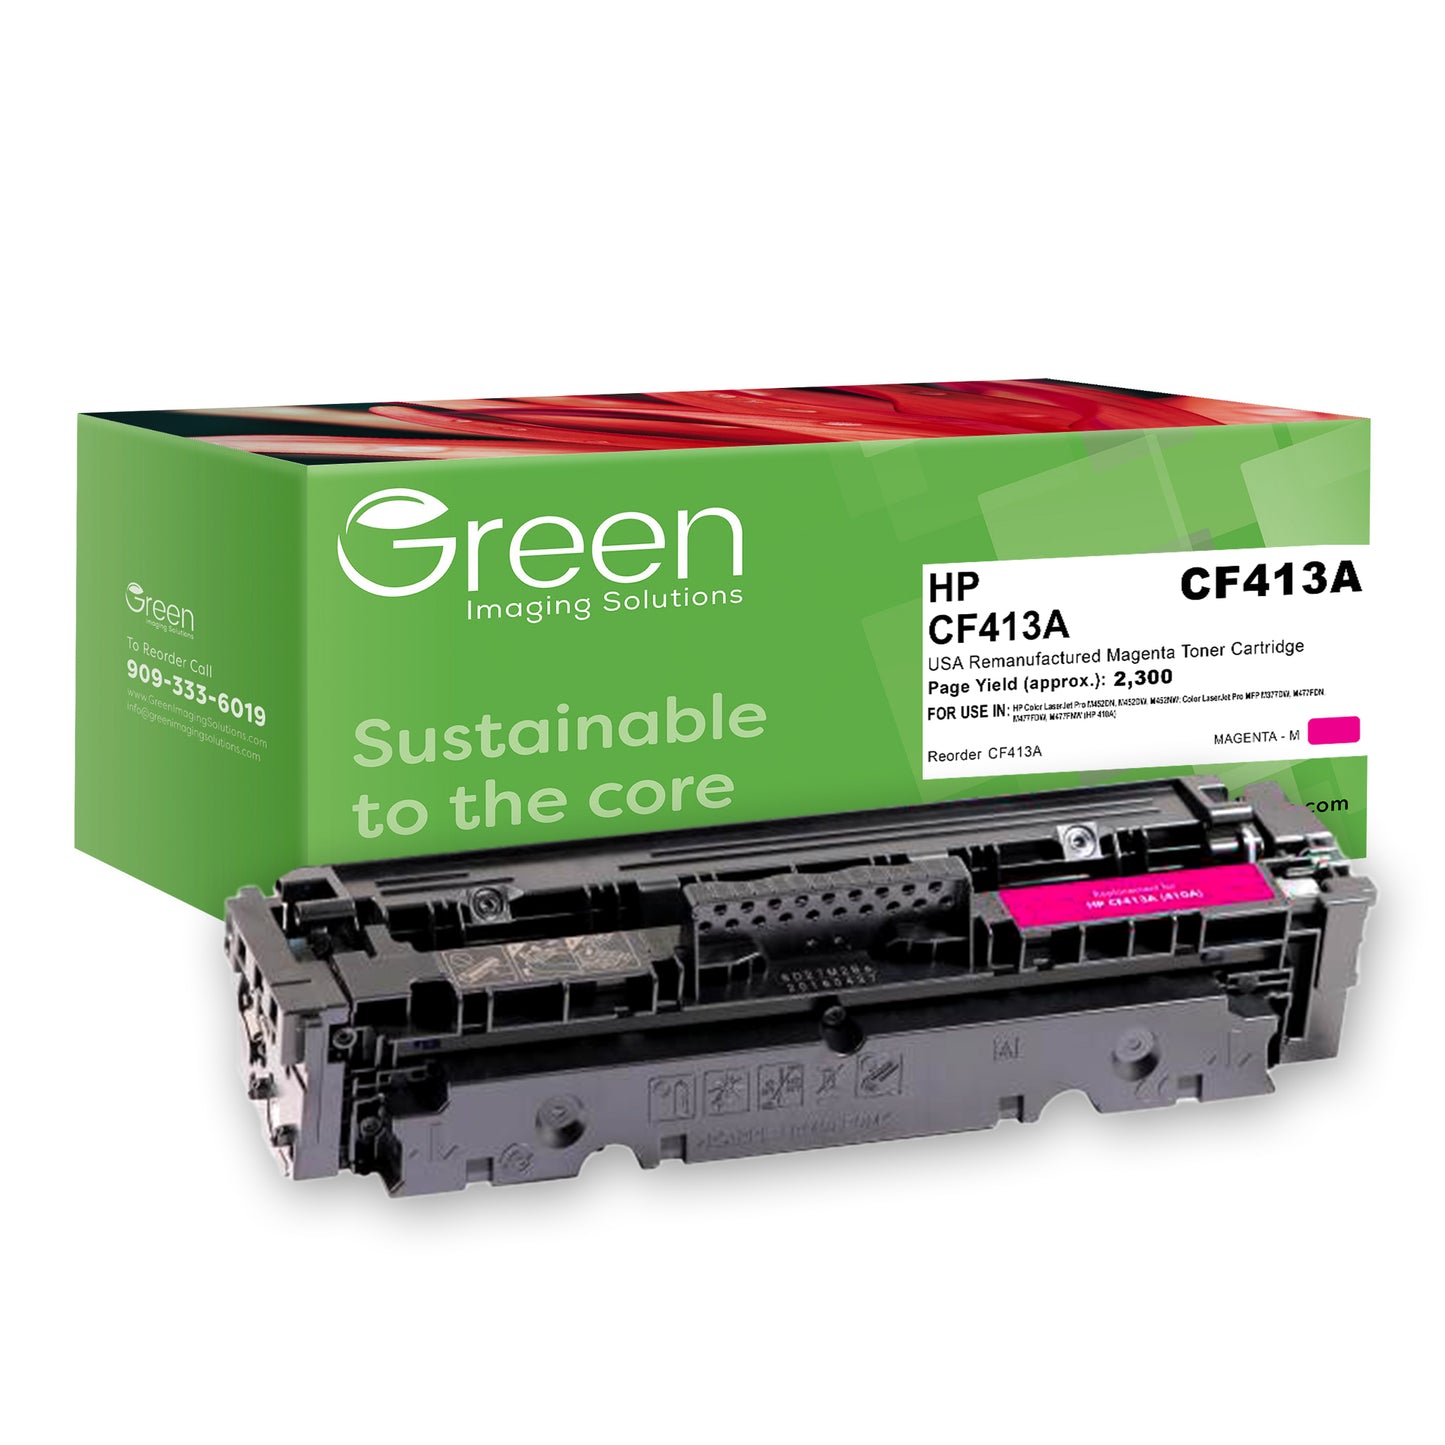 GIS USA Remanufactured Magenta Toner Cartridge for HP CF413A (HP 410A)